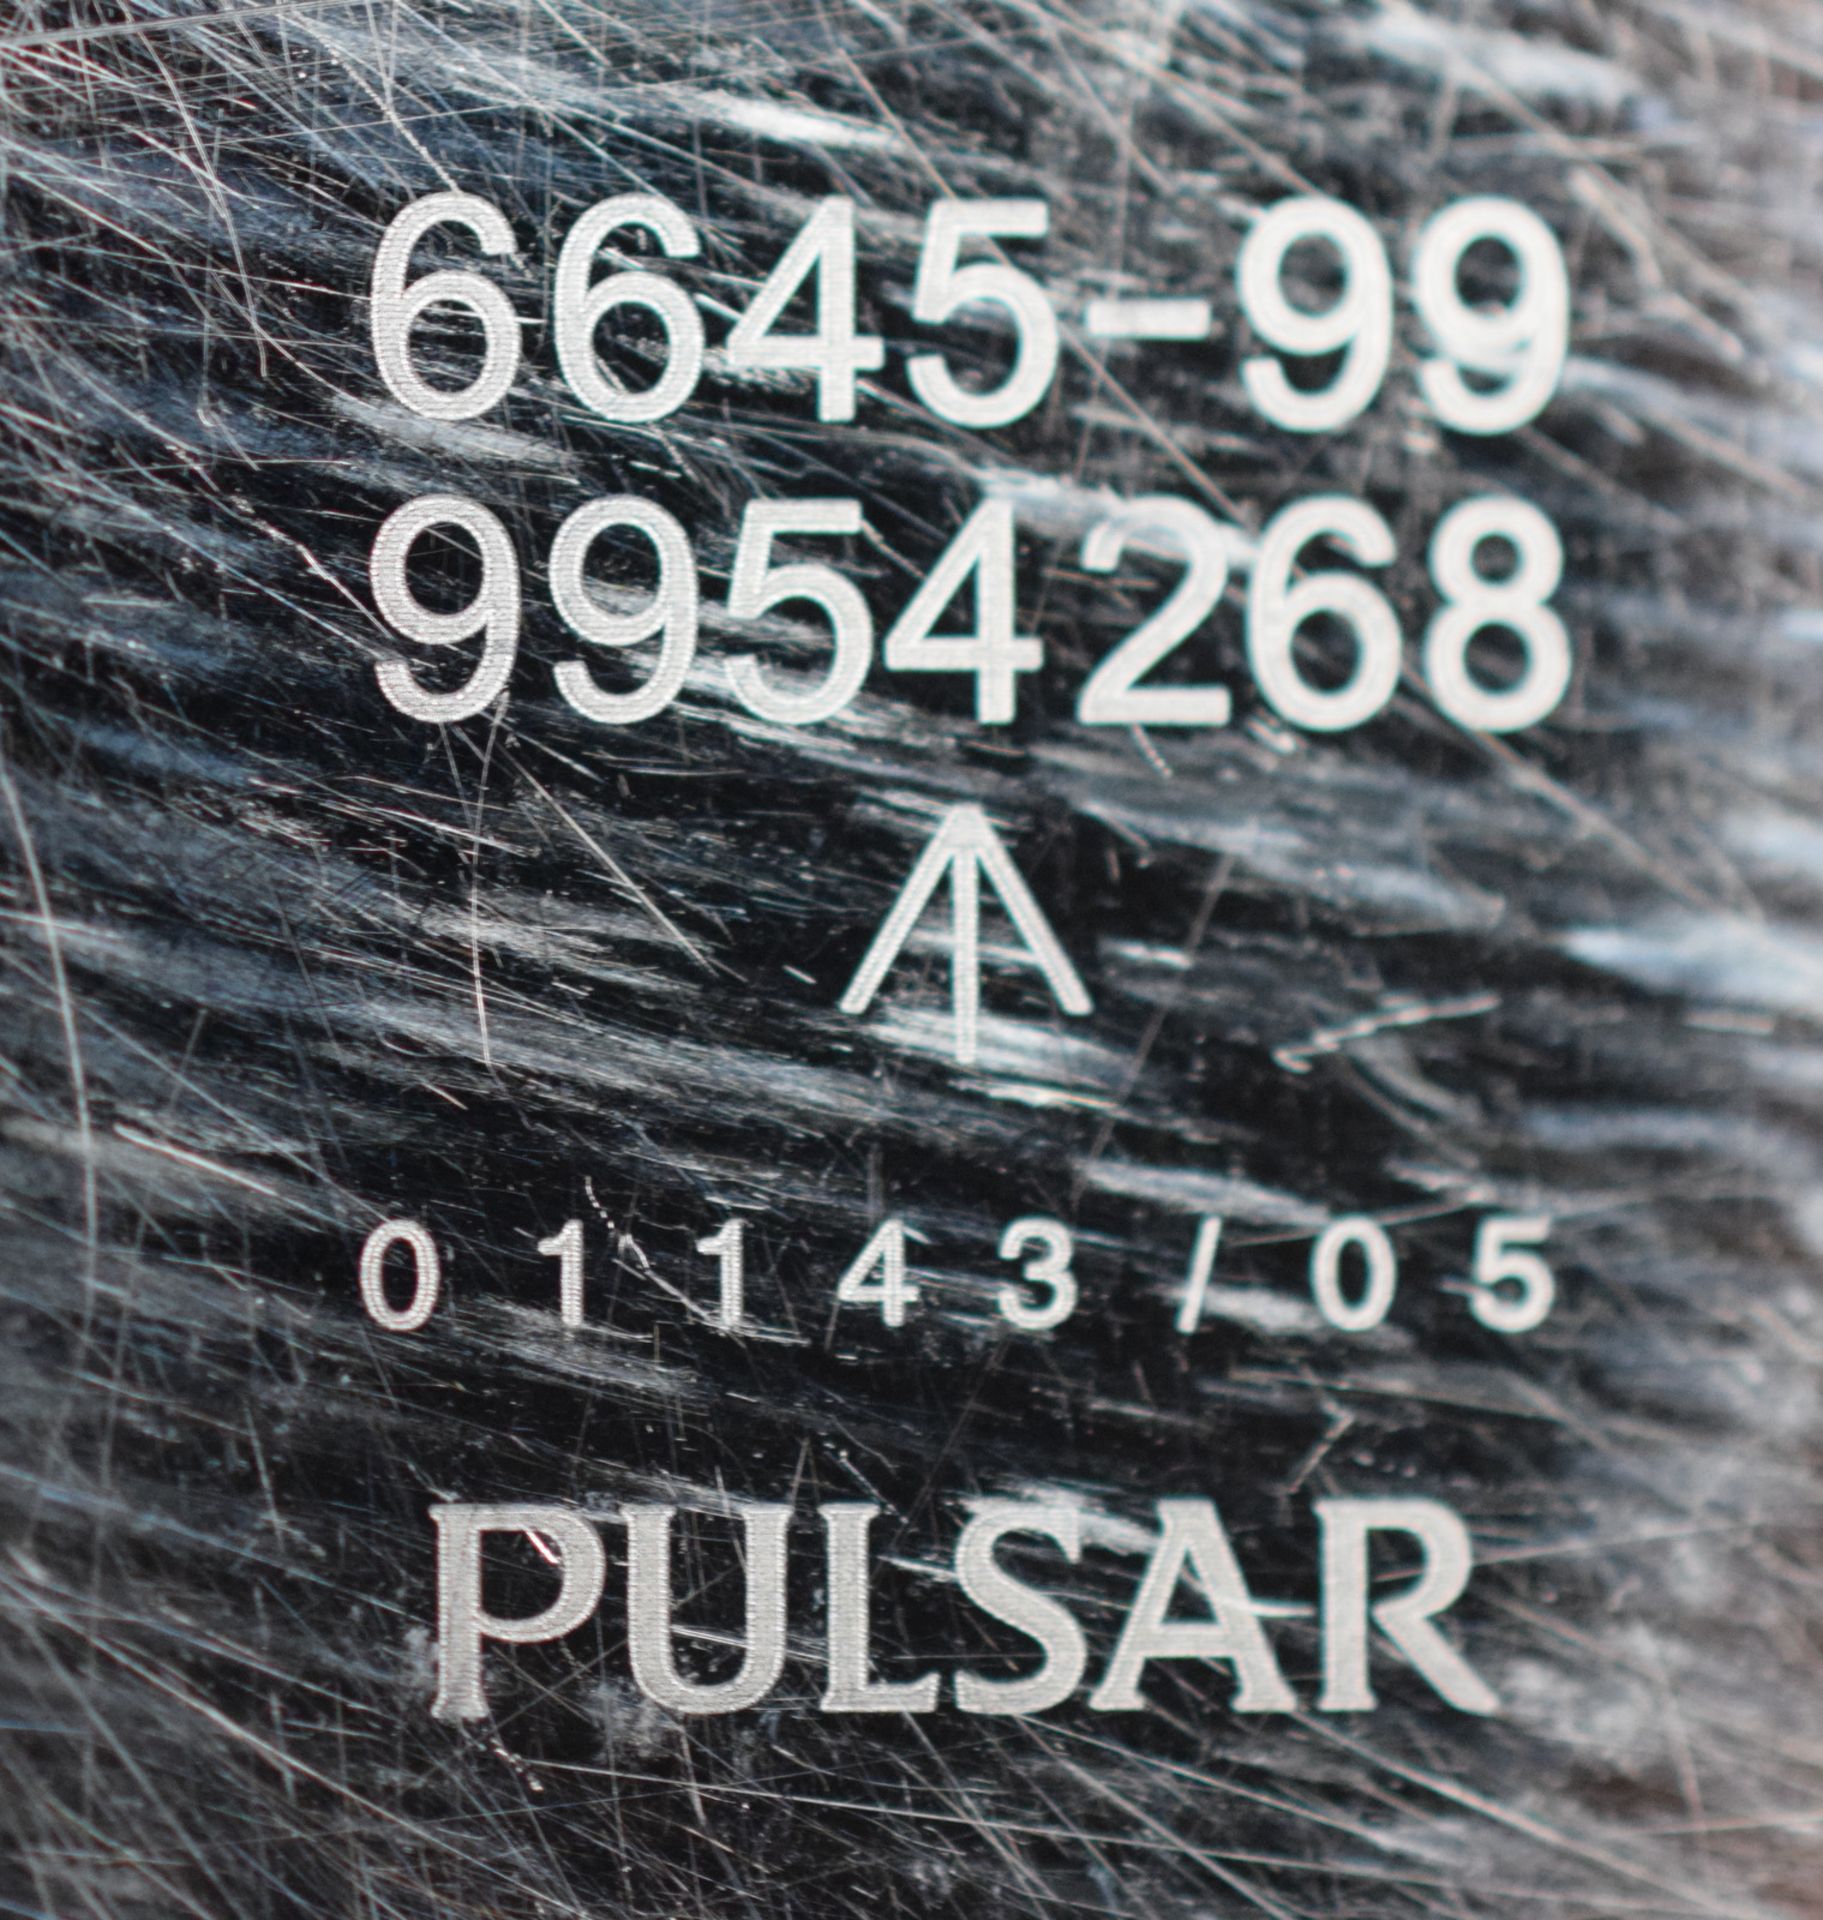 Excellent Military Pulsar Chronograph circa 2005 - Image 6 of 7